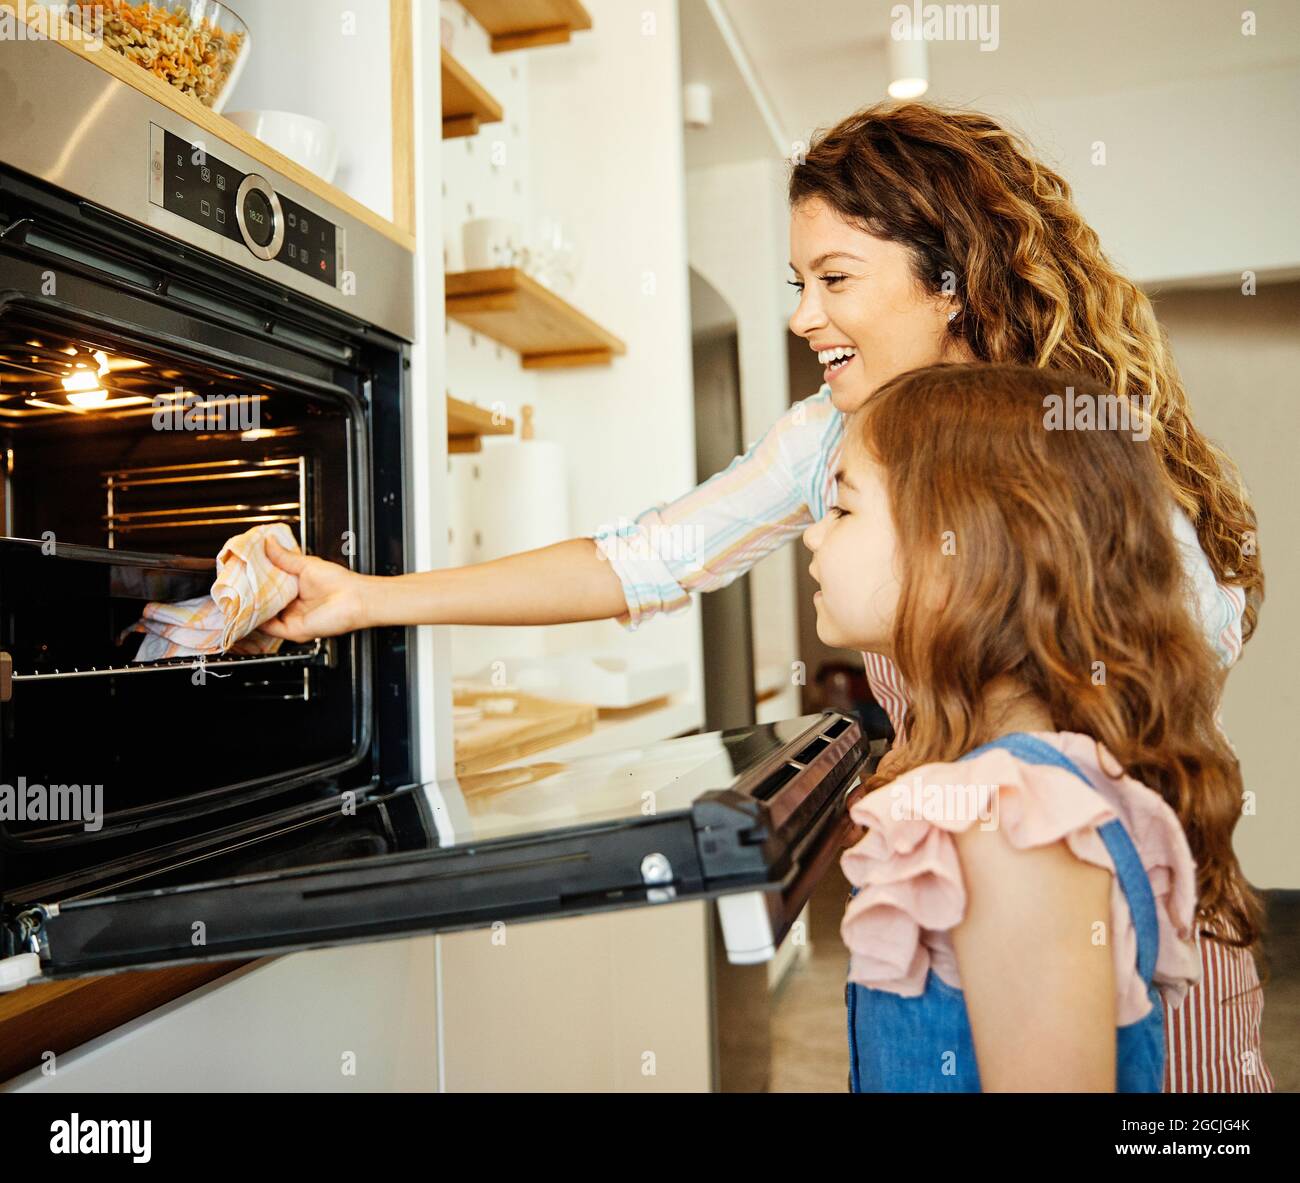 daughter mother kitchen food preparing cooking child oven baking homemade girl home parent Stock Photo